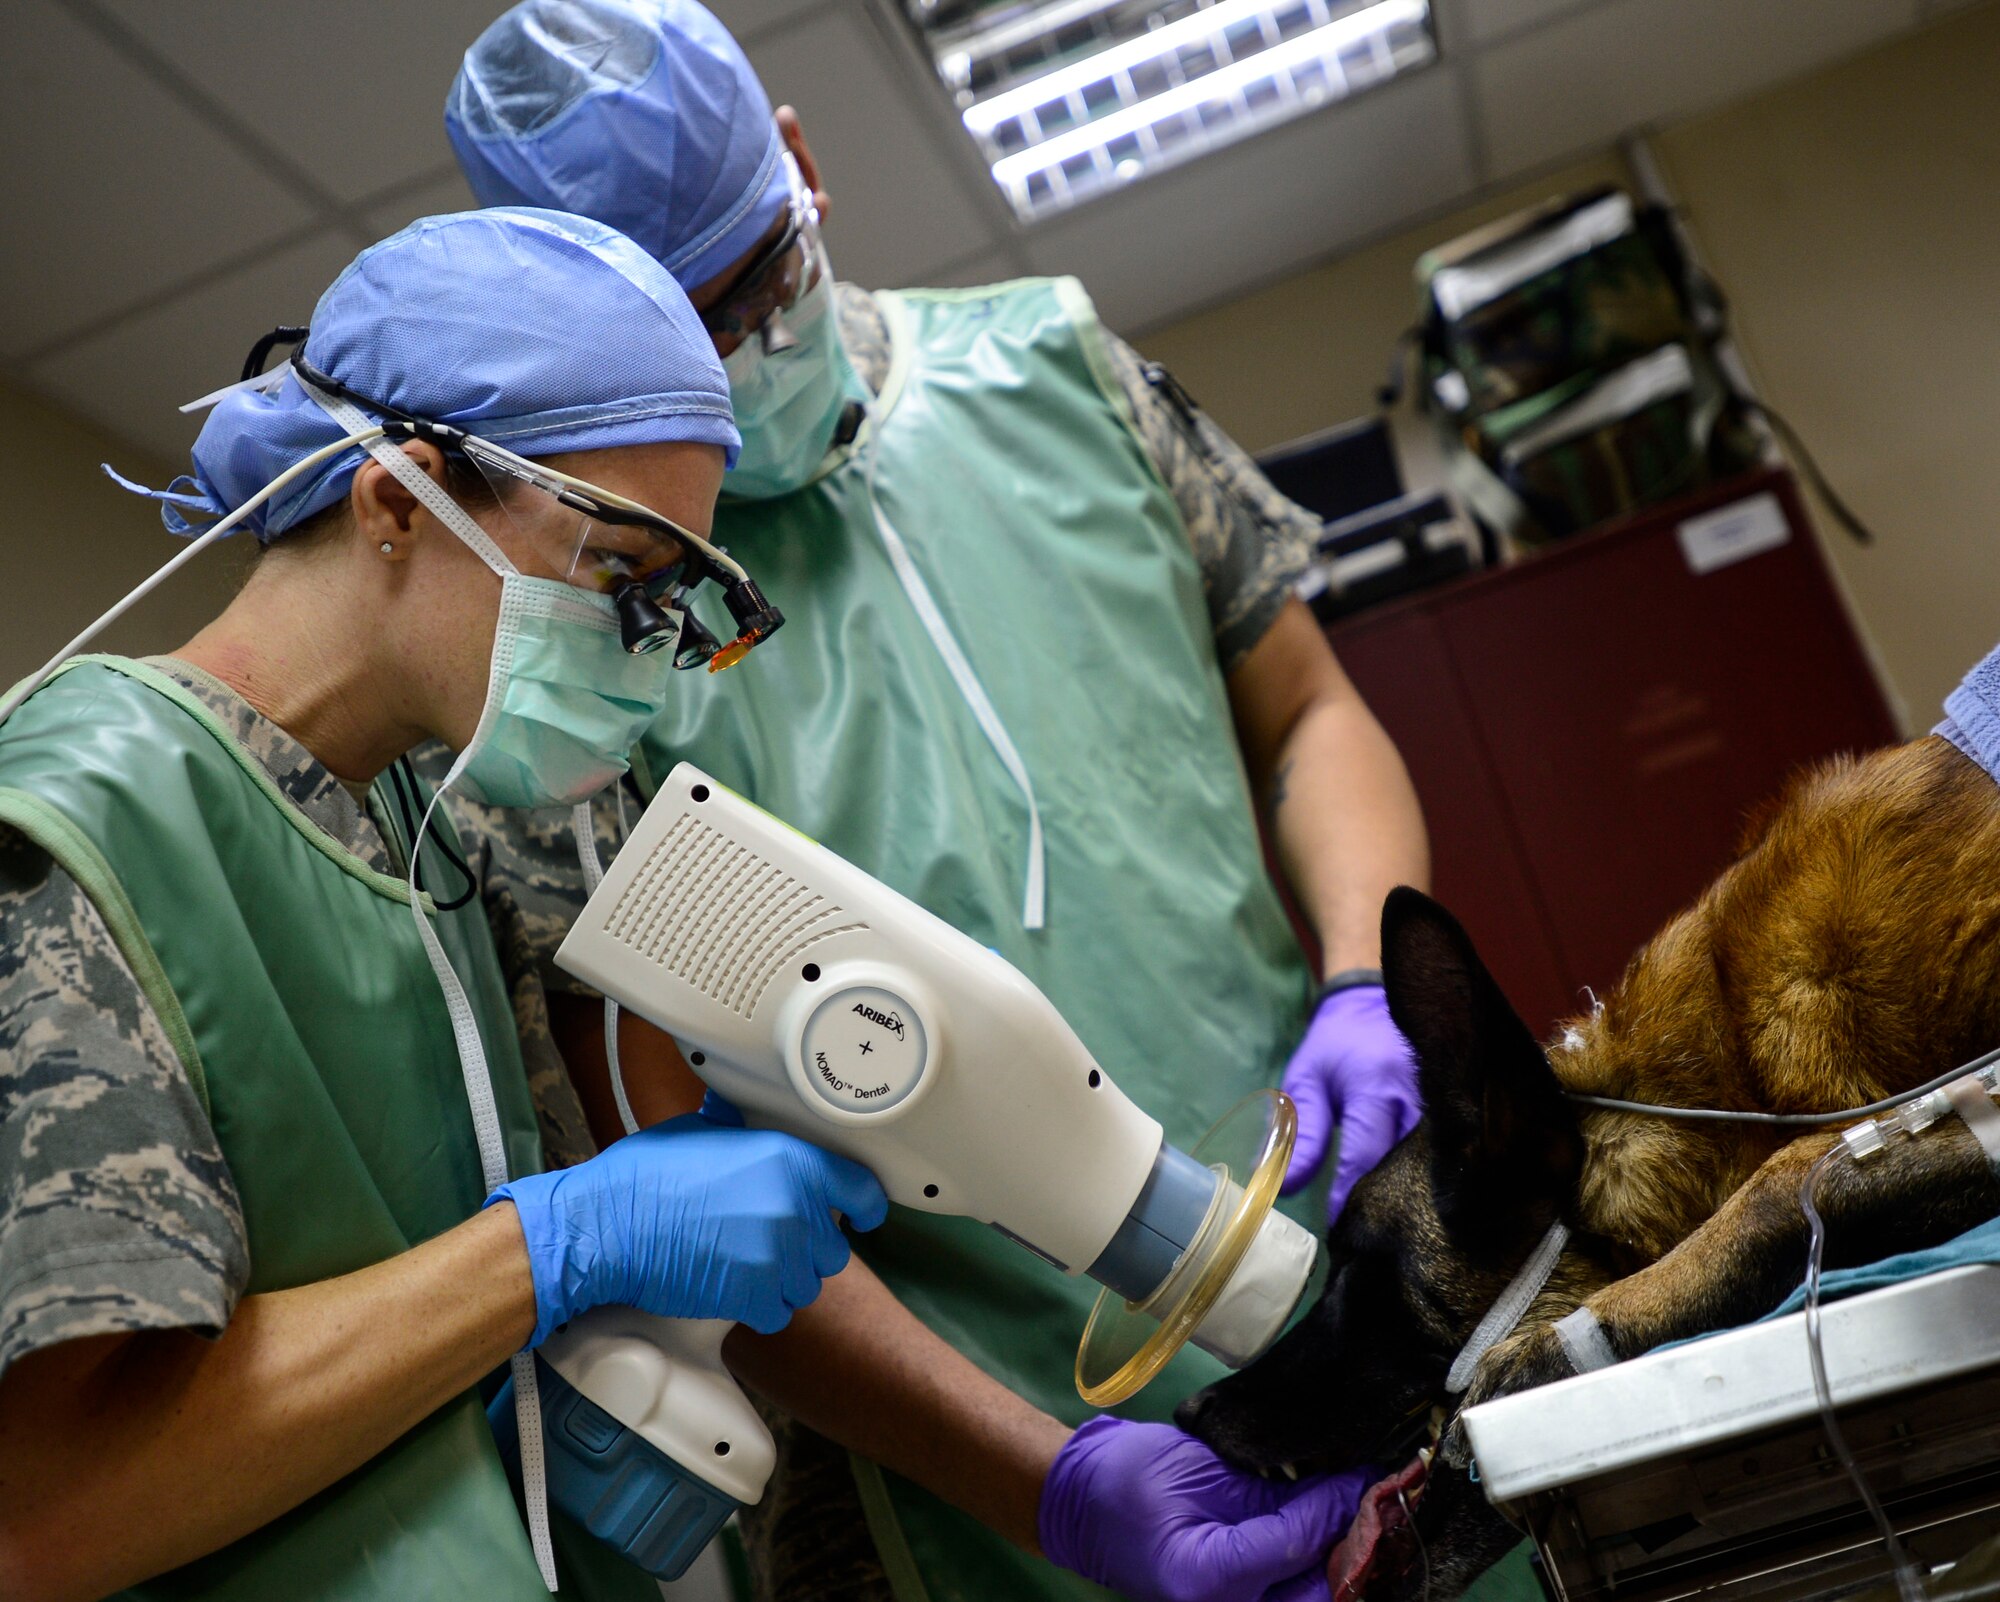 U.S. Air Force Capt. Marie Cross, 386th Expeditionary Medical Group general dentist, and Staff Sgt. Gregory Johnson, 386th Expeditionary Medical Support Squadron dental technician, take x-rays of VVladimir, 332nd Expeditionary Security Forces Squadron Military Working Dog, during a dental cleaning at an undisclosed location in Southwest Asia, Sept. 24, 2015. Dental x-rays are photographs of the teeth, bones and soft tissues around them to help detect problems with the pearly whites, mouth and jaw, to include cavities, hidden dental structures and bone loss that cannot otherwise be seen during a visual examination. (U.S. Air Force photo by Senior Airman Racheal E. Watson/Released) 